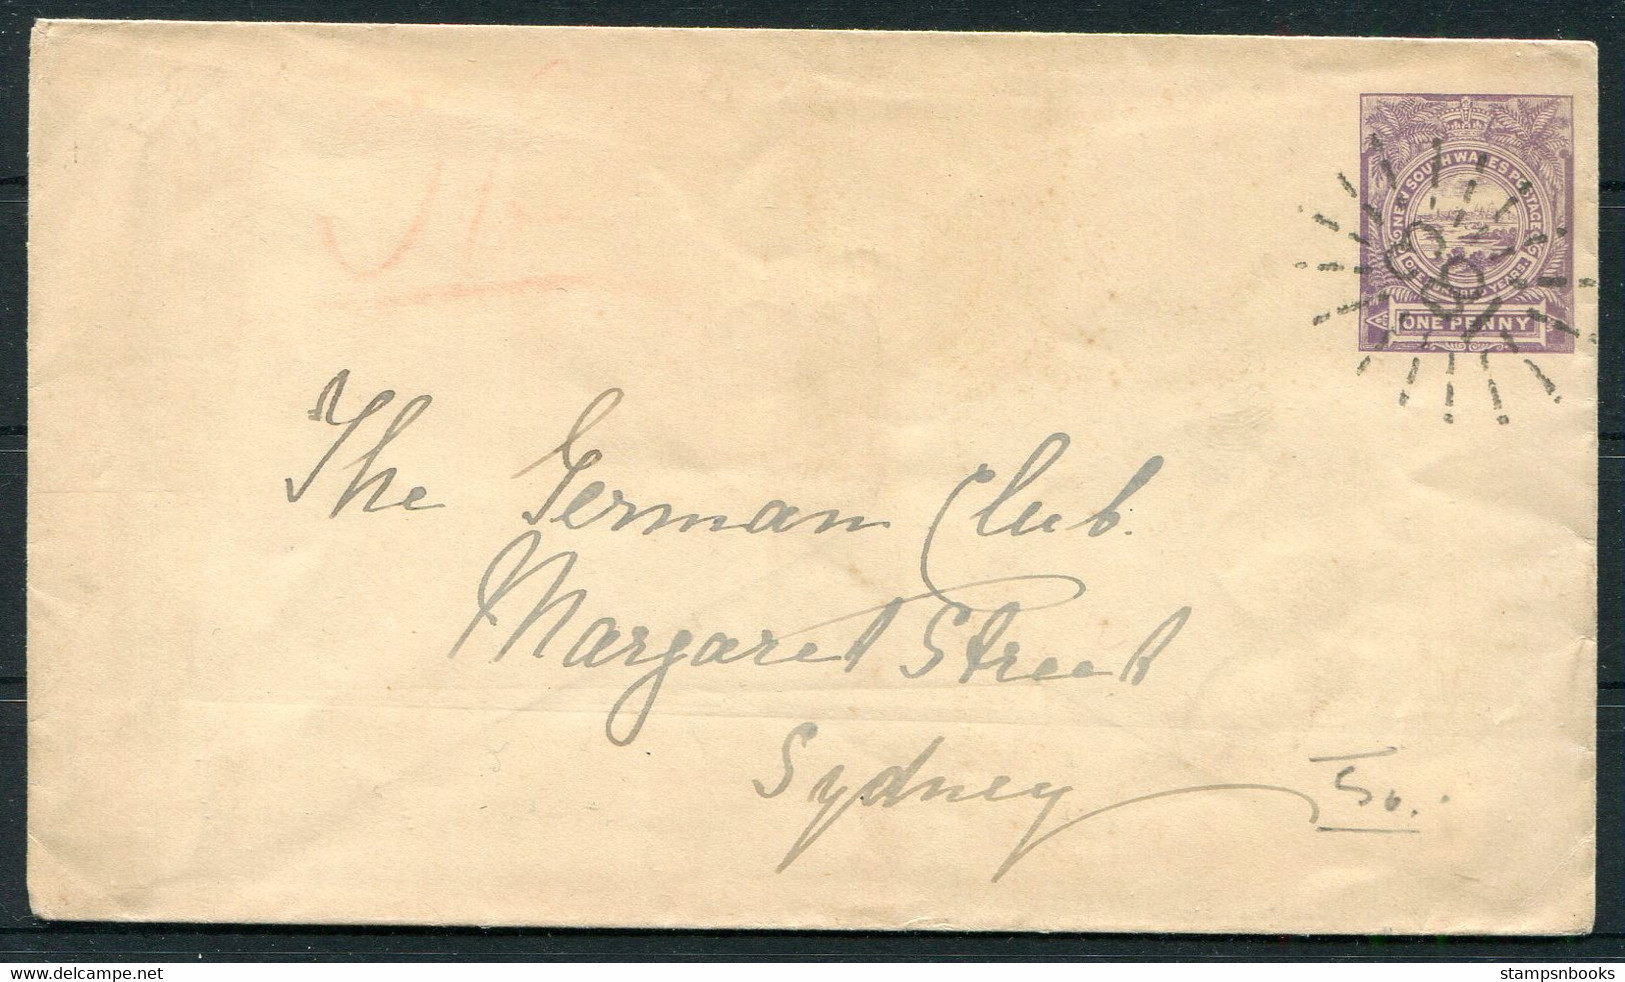 1893 New South Wales 1d Stationery Cover "183" Paddington Sydney - "The German Club" - Covers & Documents